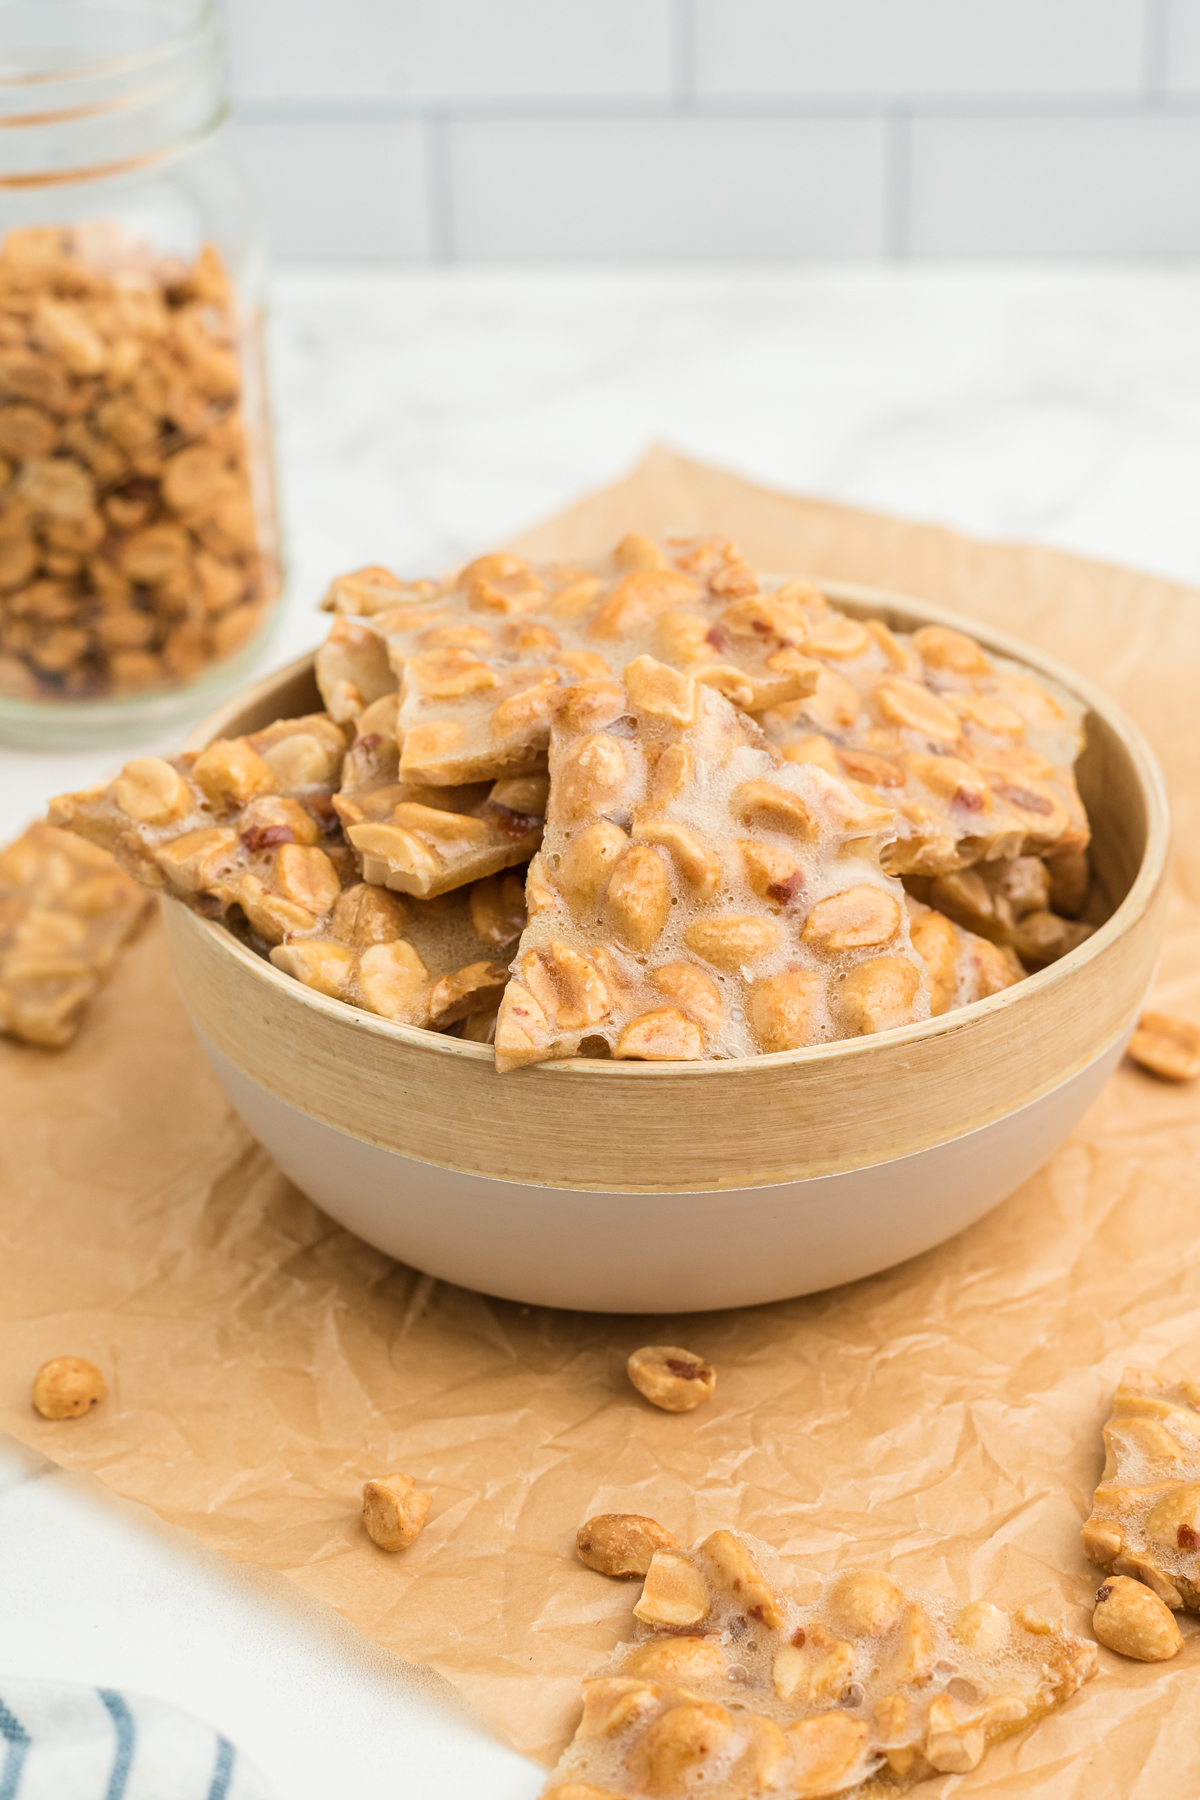 Microwave peanut brittle recipe on a bowl with a brown paper and on a counter